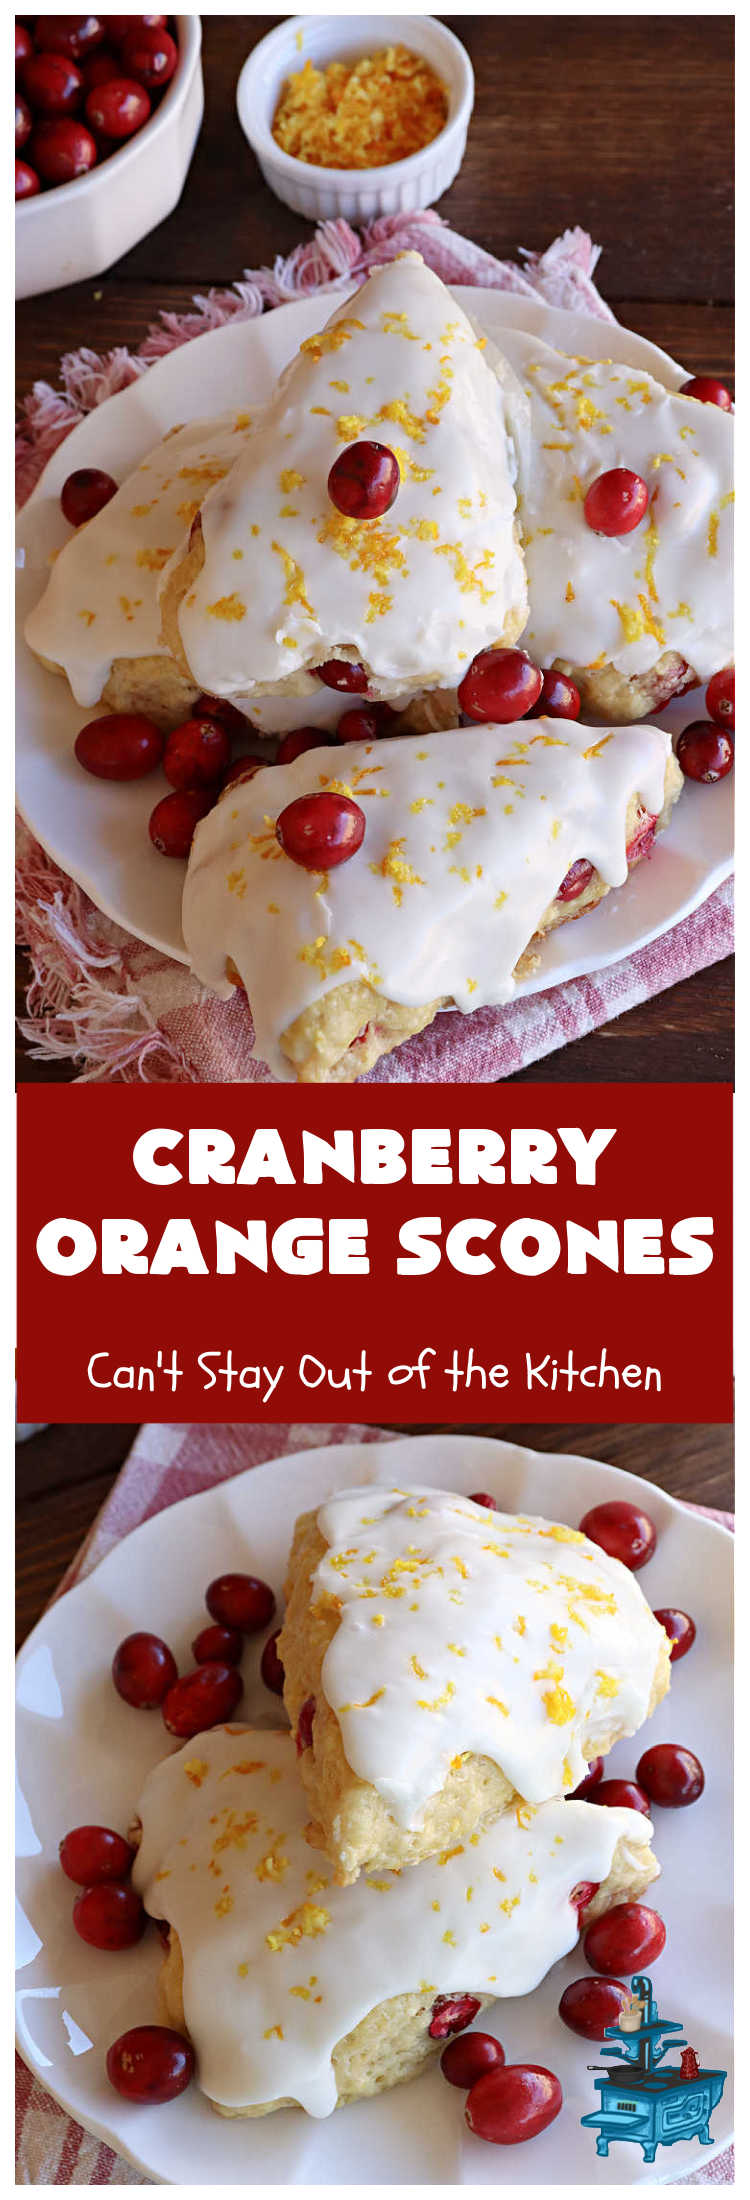 Cranberry Orange Scones | Can't Stay Out of the Kitchen | these luscious #scones have the most spectacular  combination of flavors using fresh #cranberries, #OrangeZest & featuring a luscious #orange icing with more Orange Zest on top. They simply beg to be eaten! You'll be swooning after sinking your teeth into these amazing #CranberryOrangeScones. Great for a weekend, company or #holiday #breakfast or #brunch like #Thanksgiving, #Christmas, #NewYearsDay or #ValentinesDay.